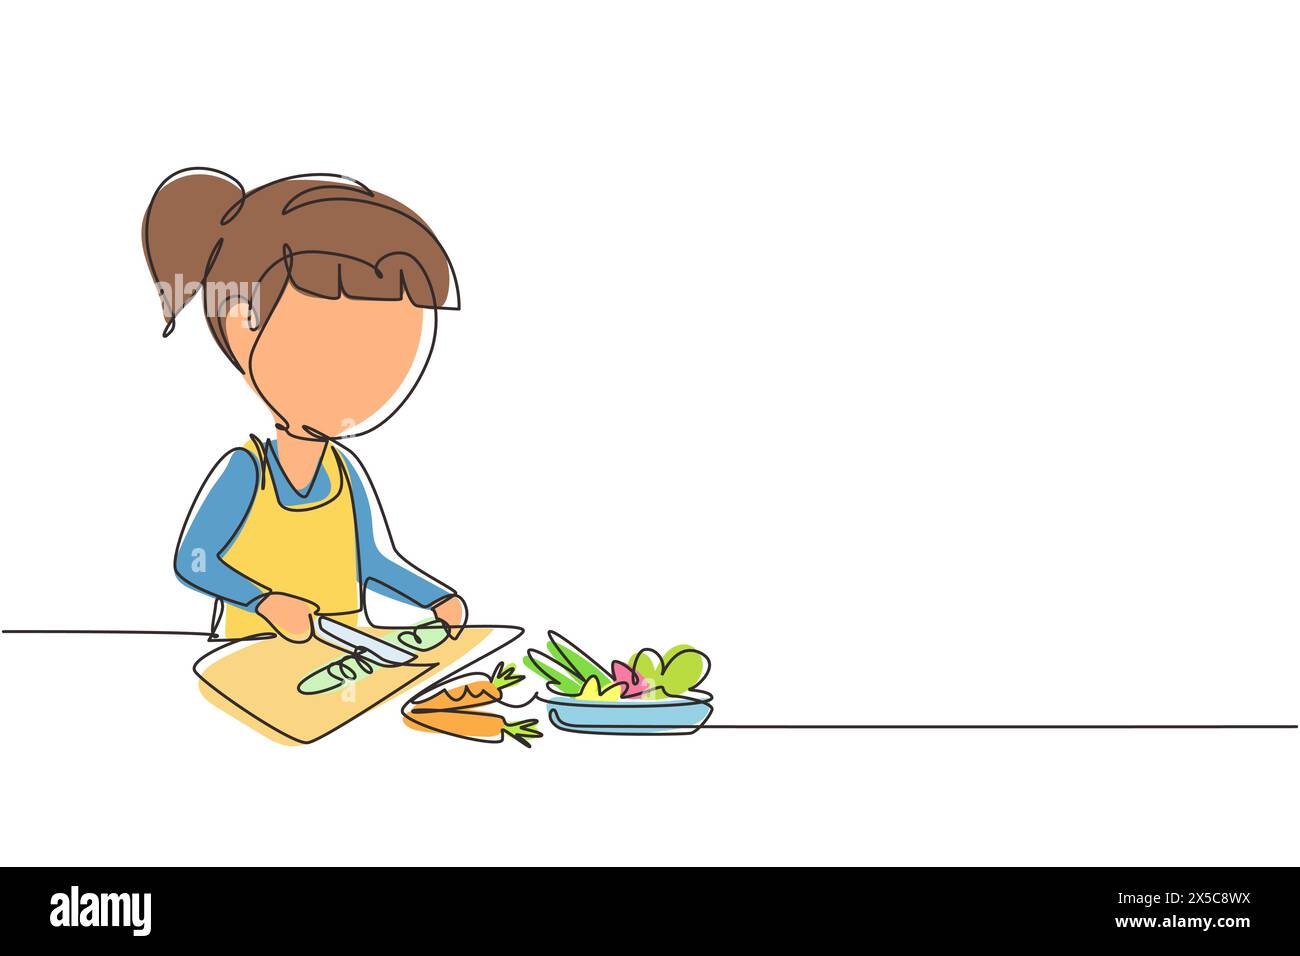 Single continuous line drawing little girl is cutting carrot and other fresh vegetables. Smiling child is enjoying cooking at home to help mother. One Stock Vector